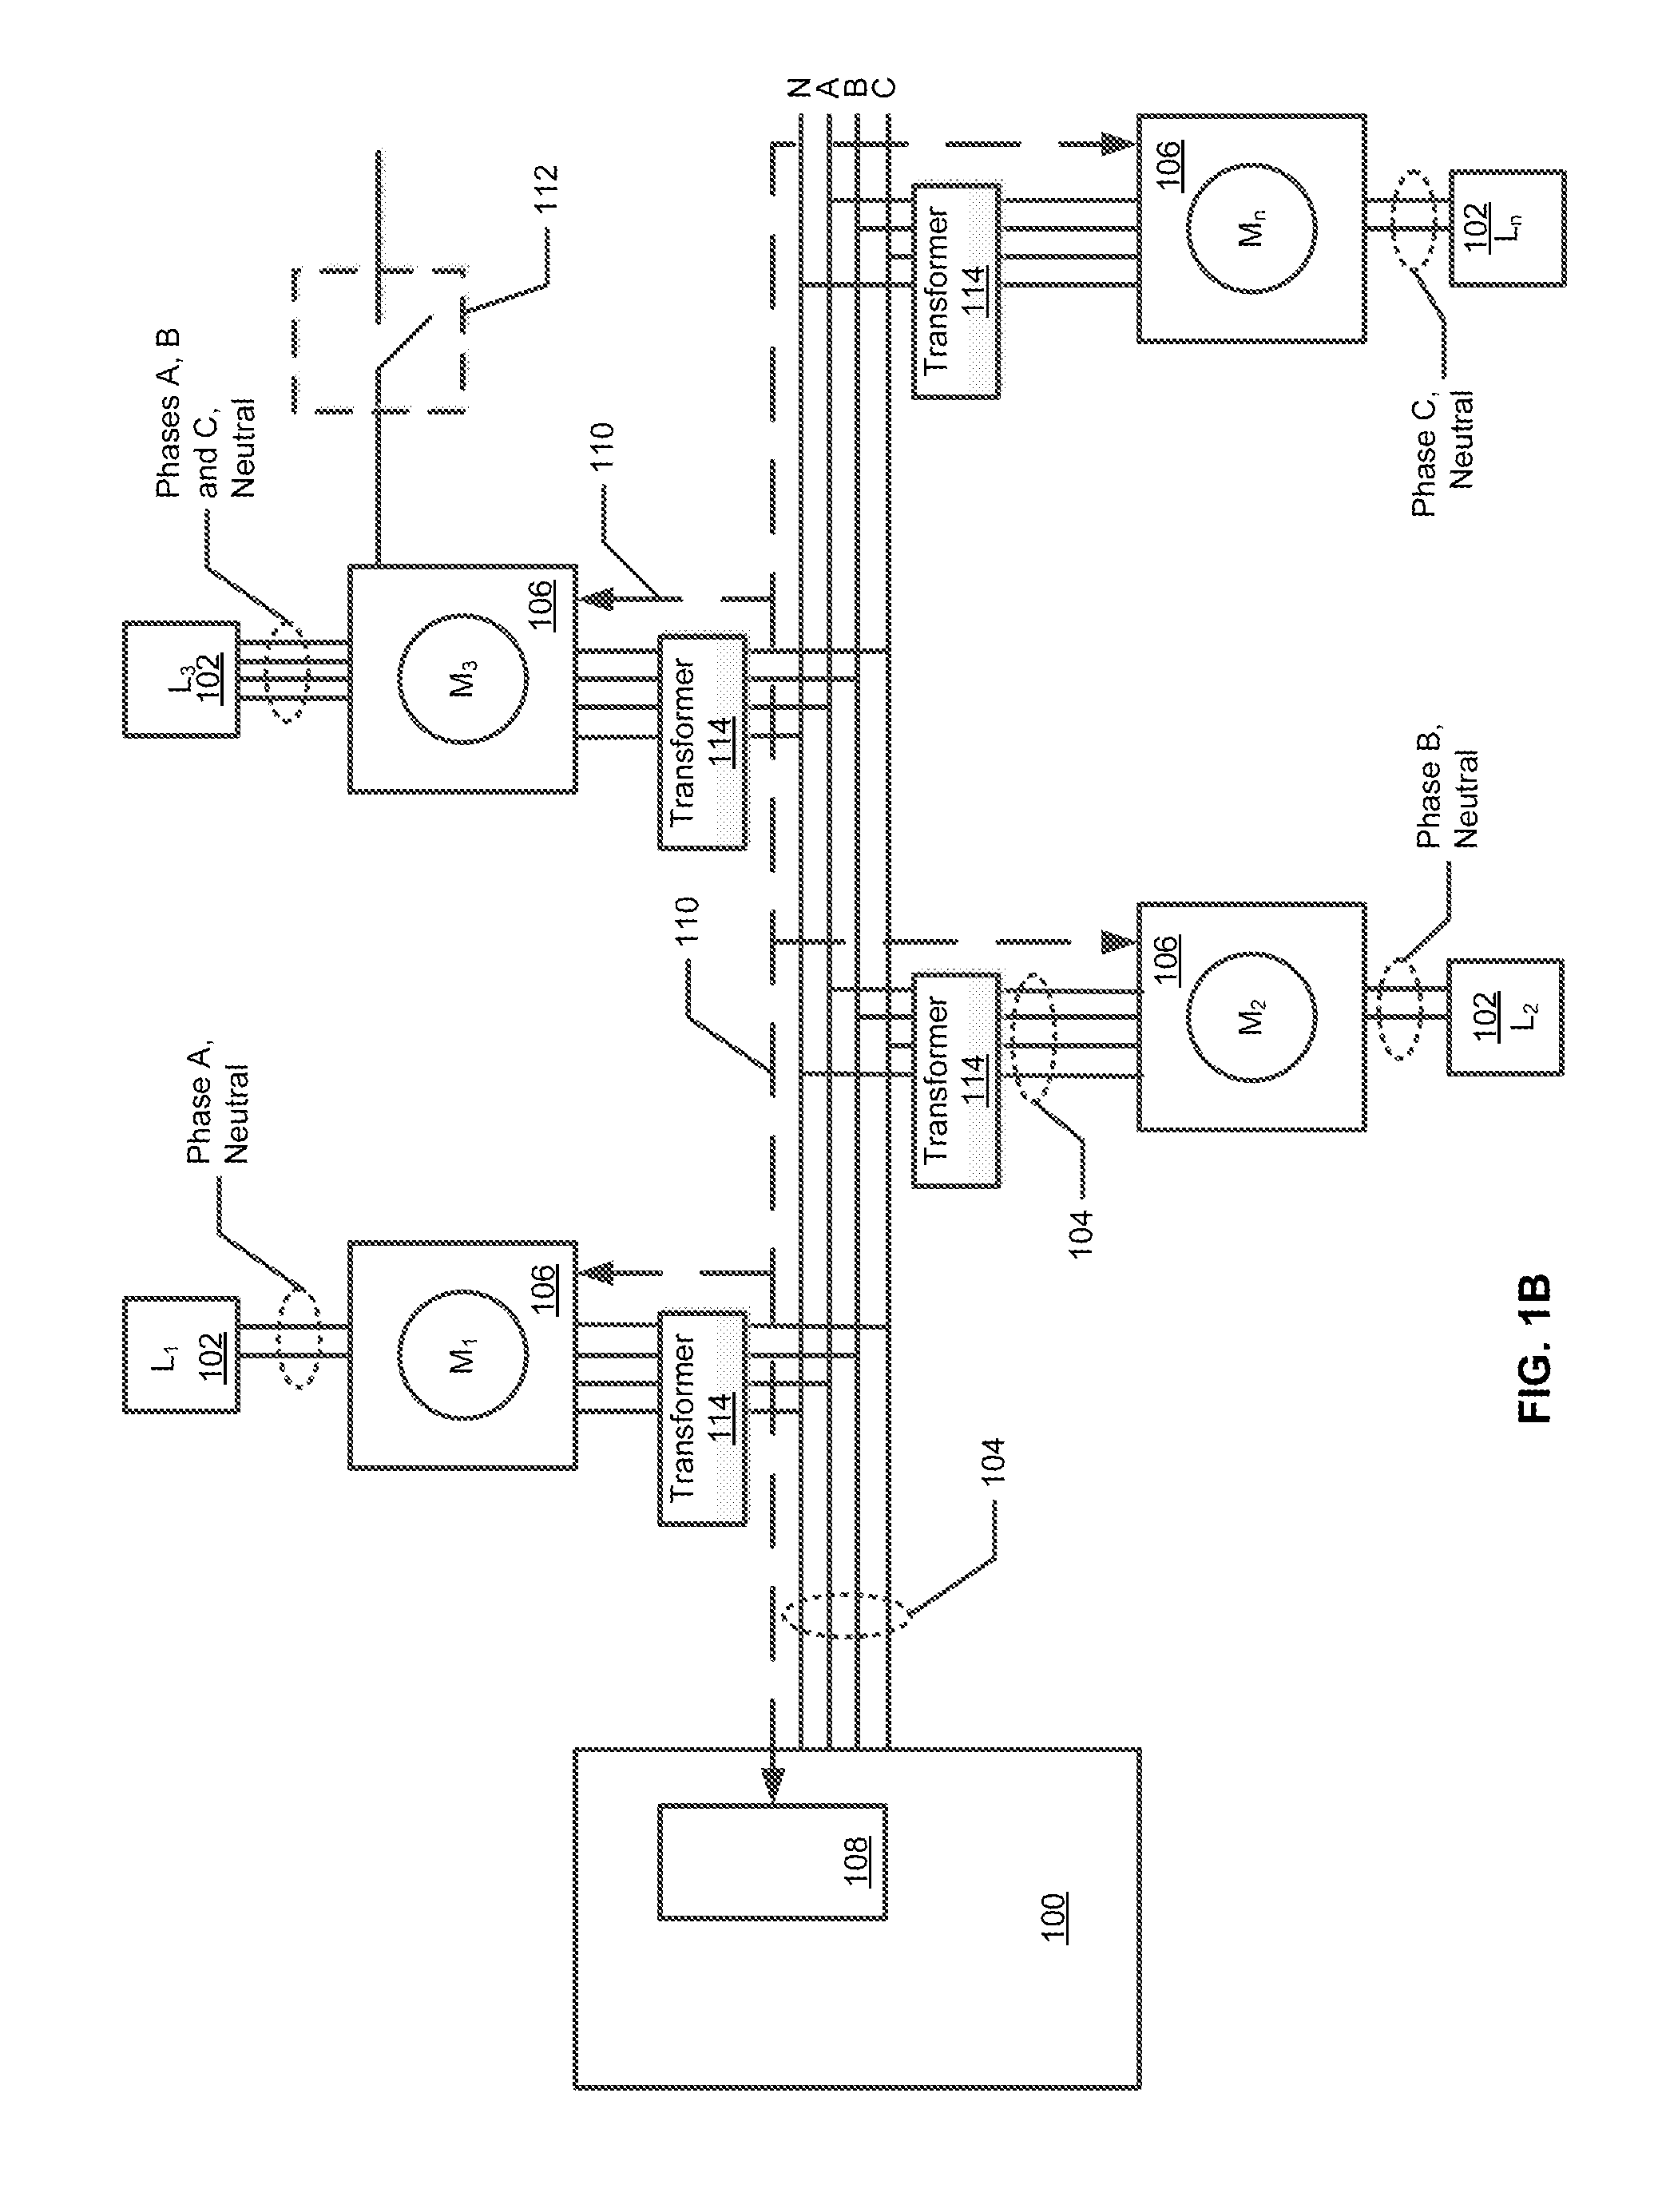 Method, system and device of phase identification using a smart meter